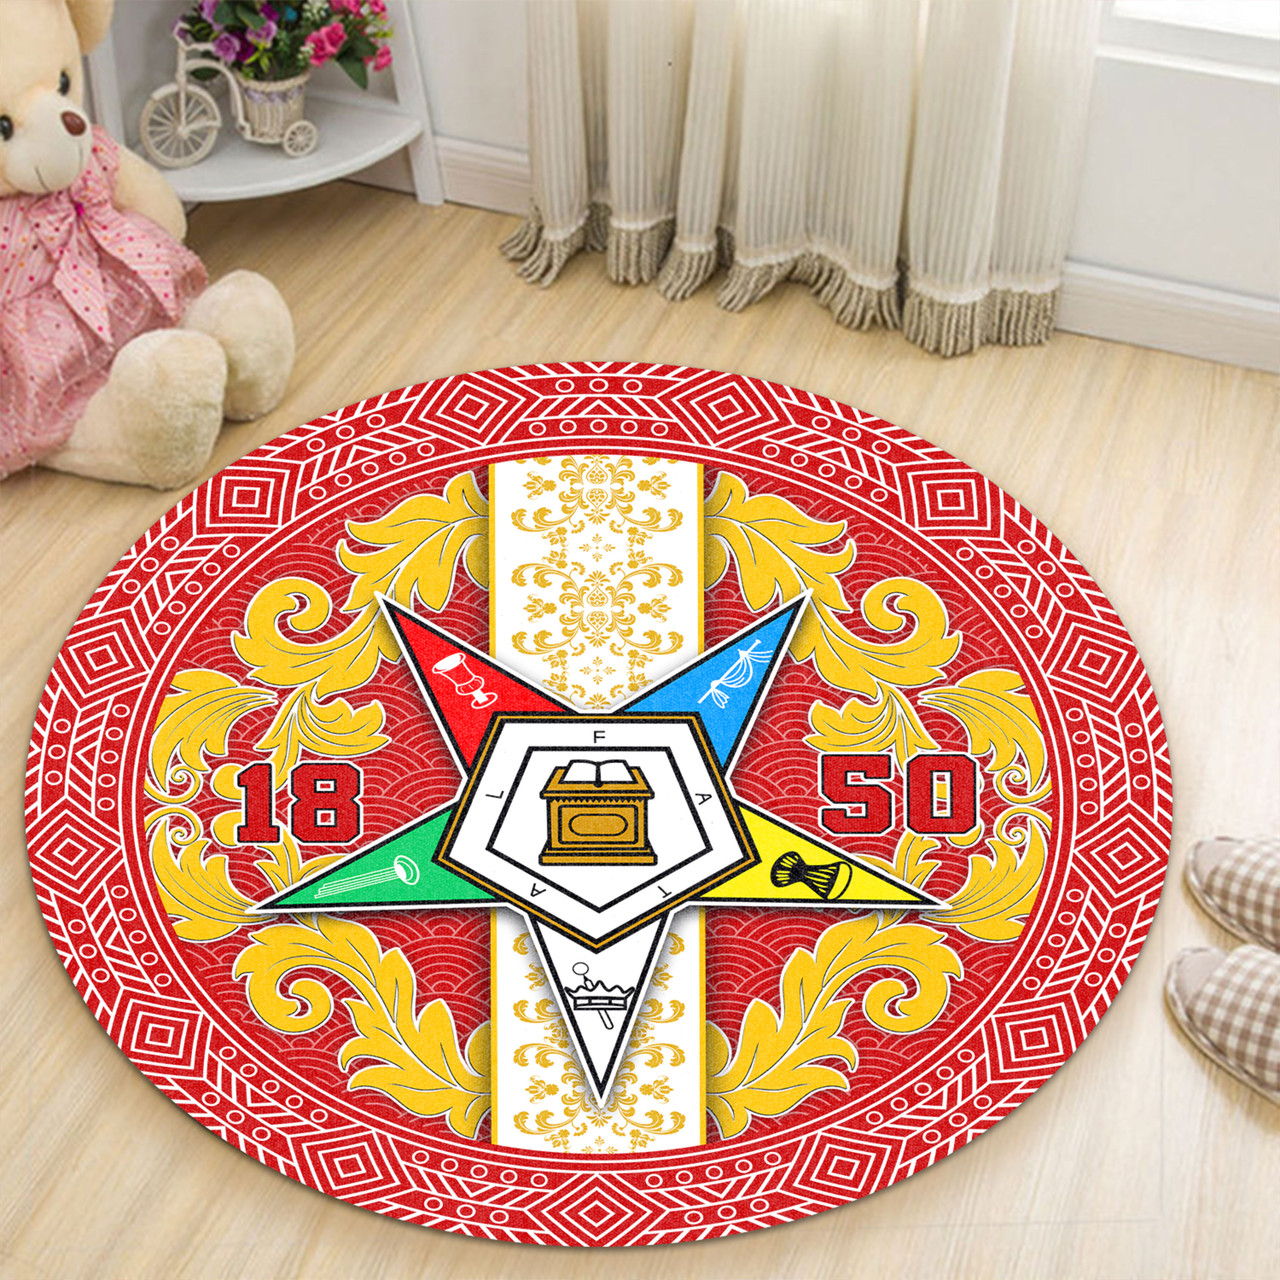 Order of the Eastern Star Round Rug Royal